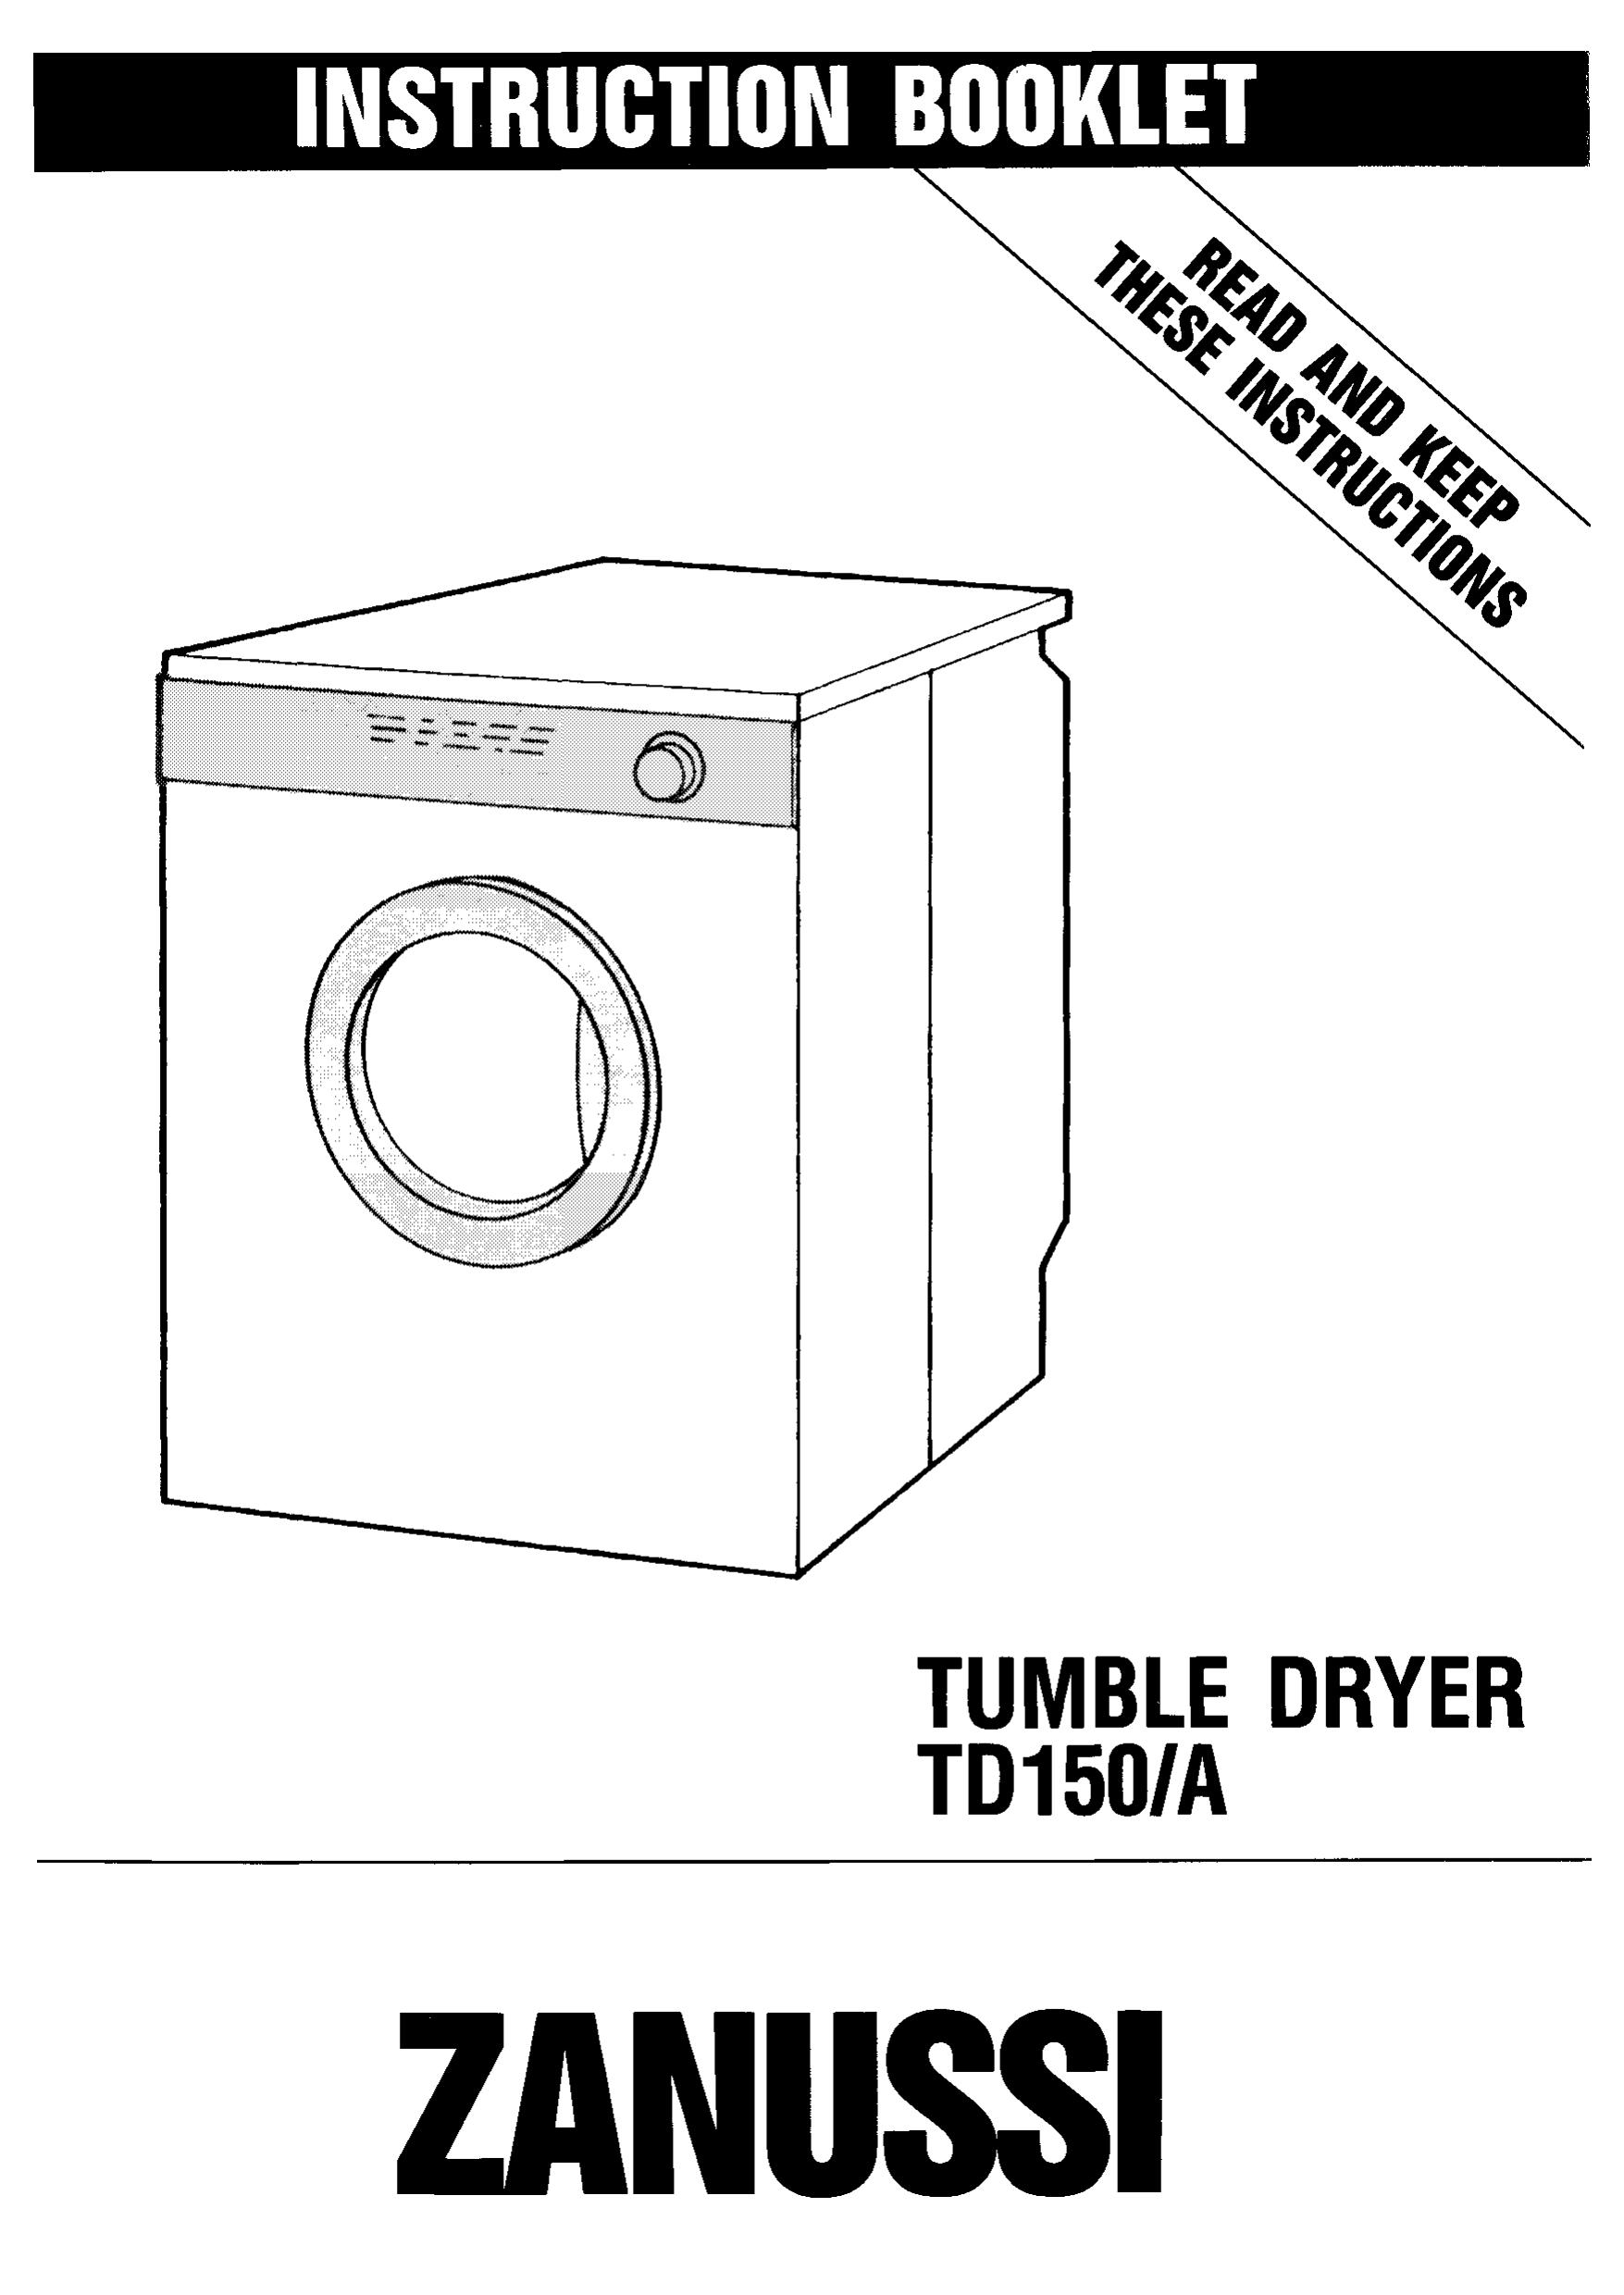 Zanussi TD150/A Clothes Dryer User Manual